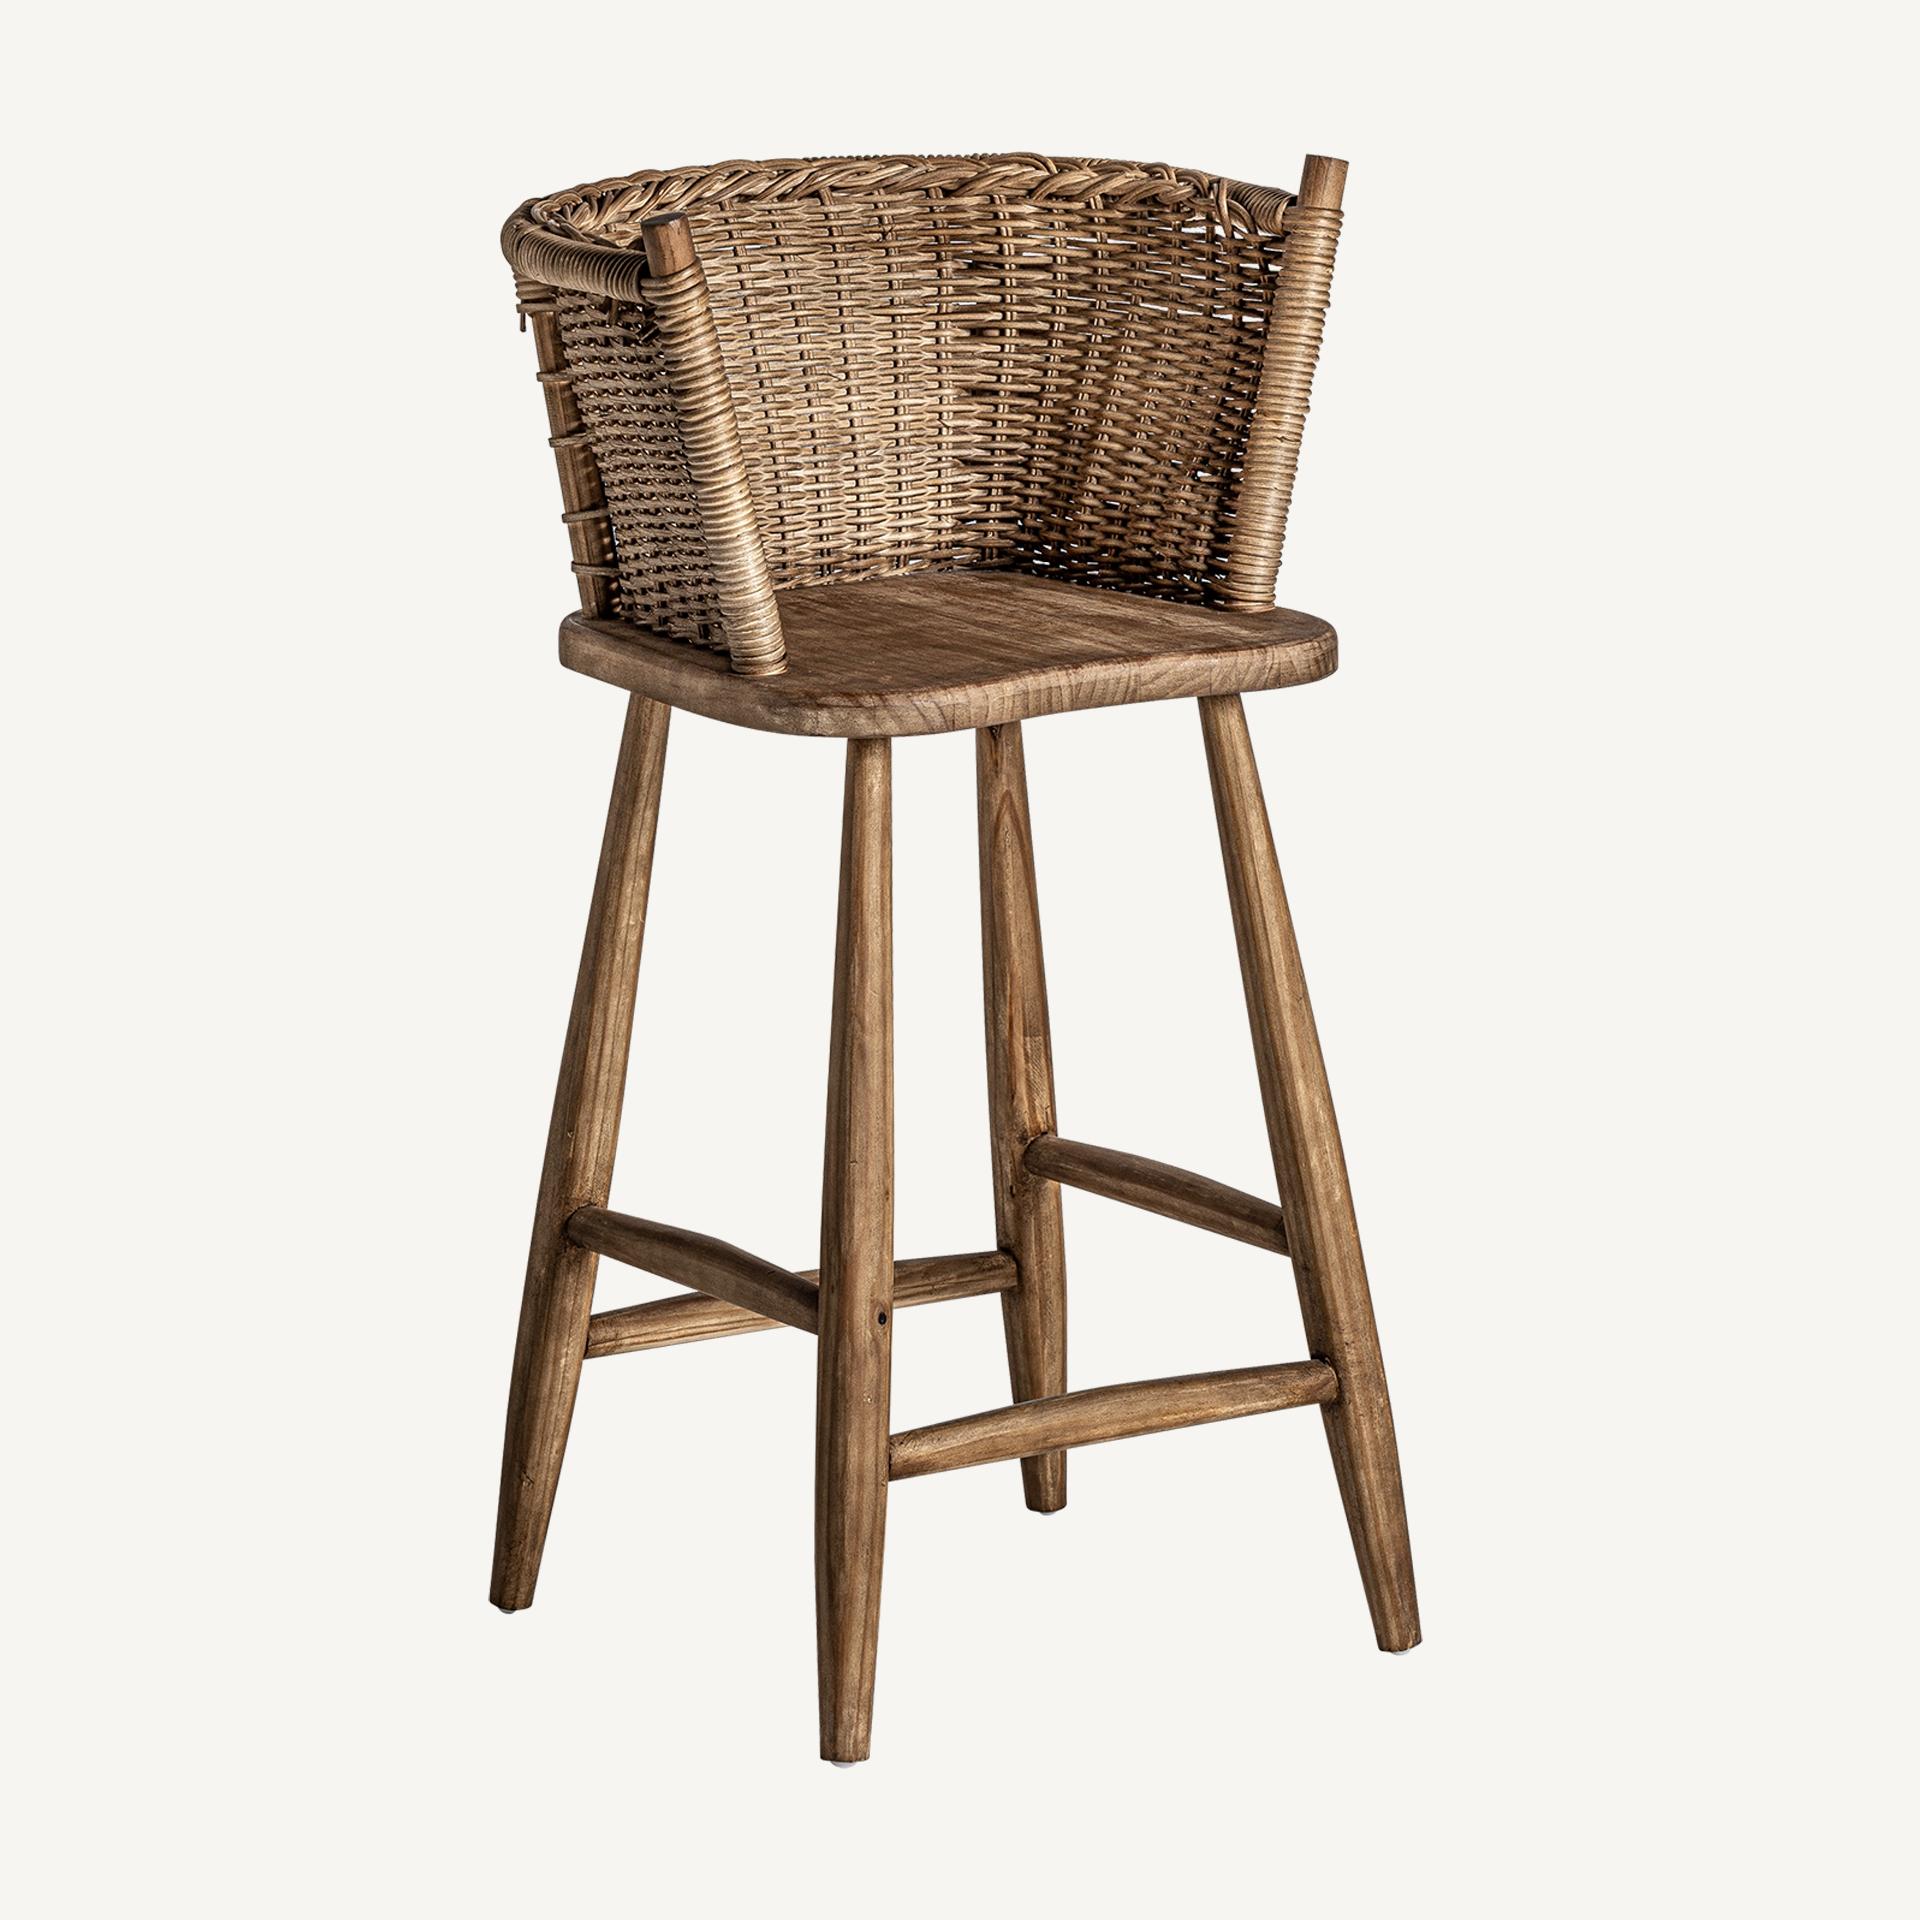 Scandinavian Modern Handcrafted Braided Wicker and Wooden Bar Stool For Sale